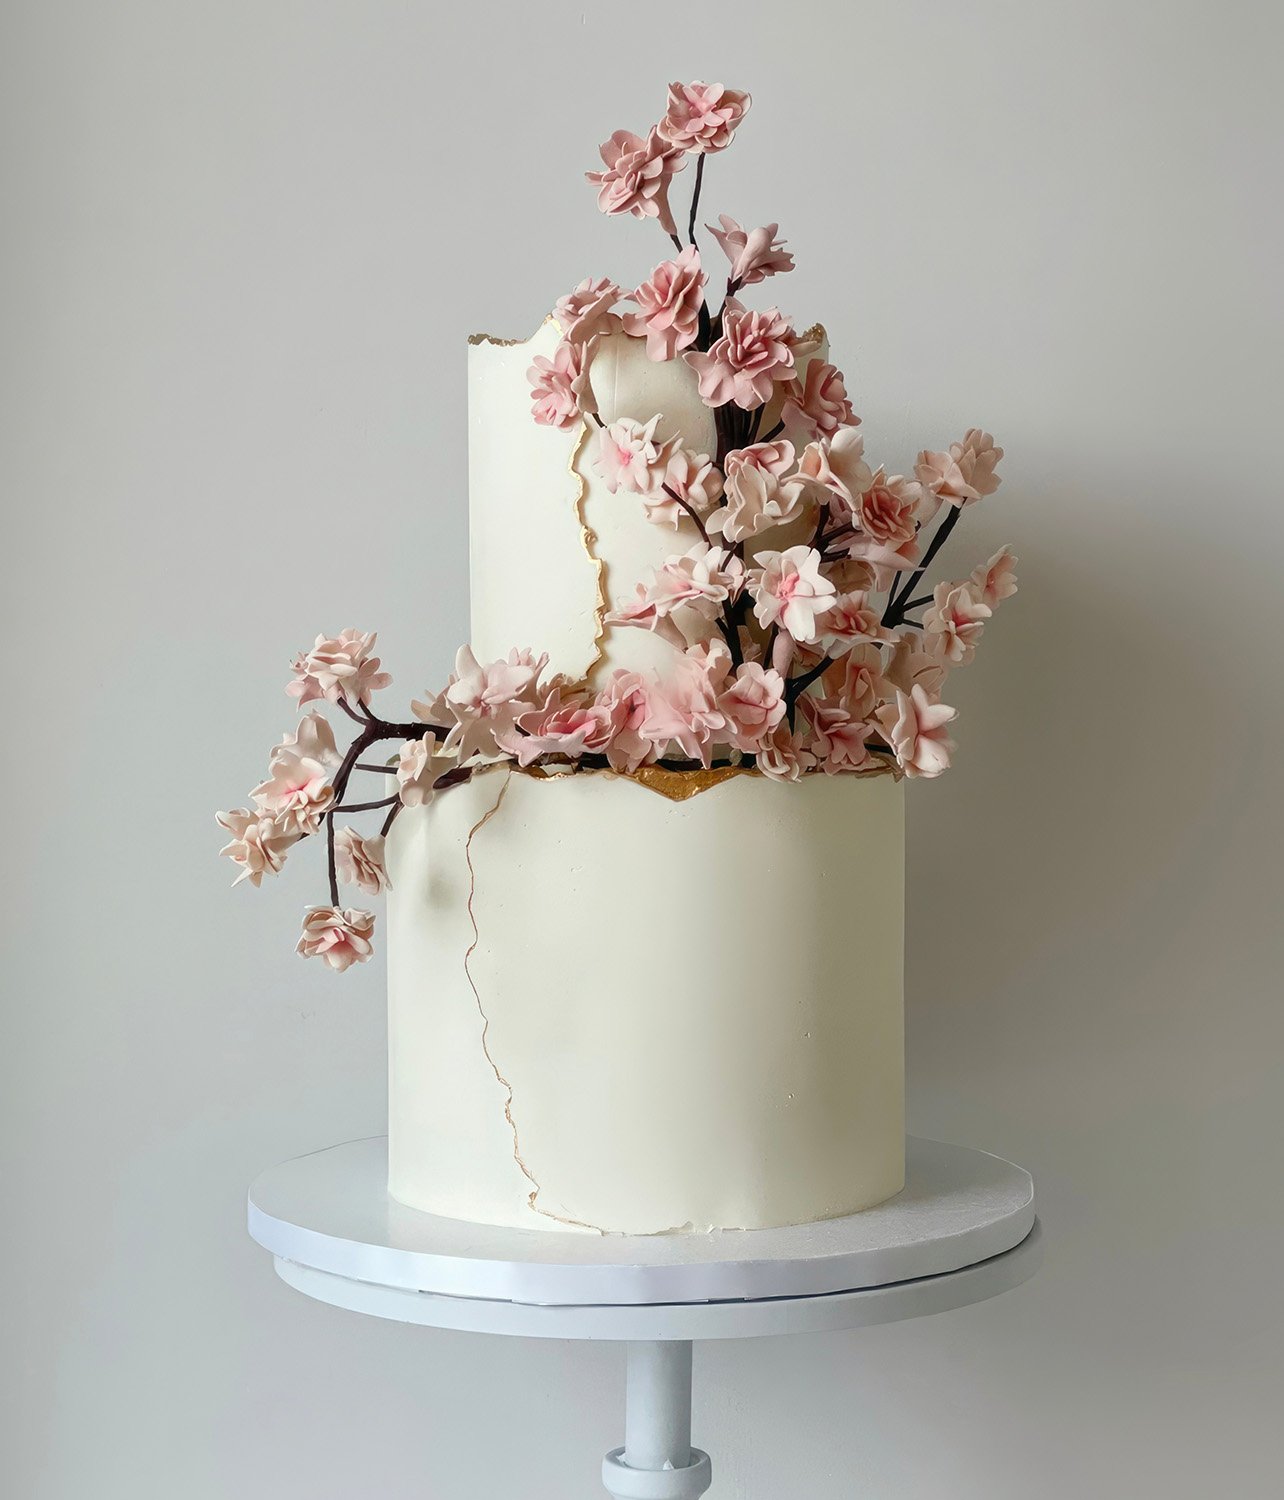 Portrait of a 2-tier buttercream cake with cherry blossom-inspired sugar flowers